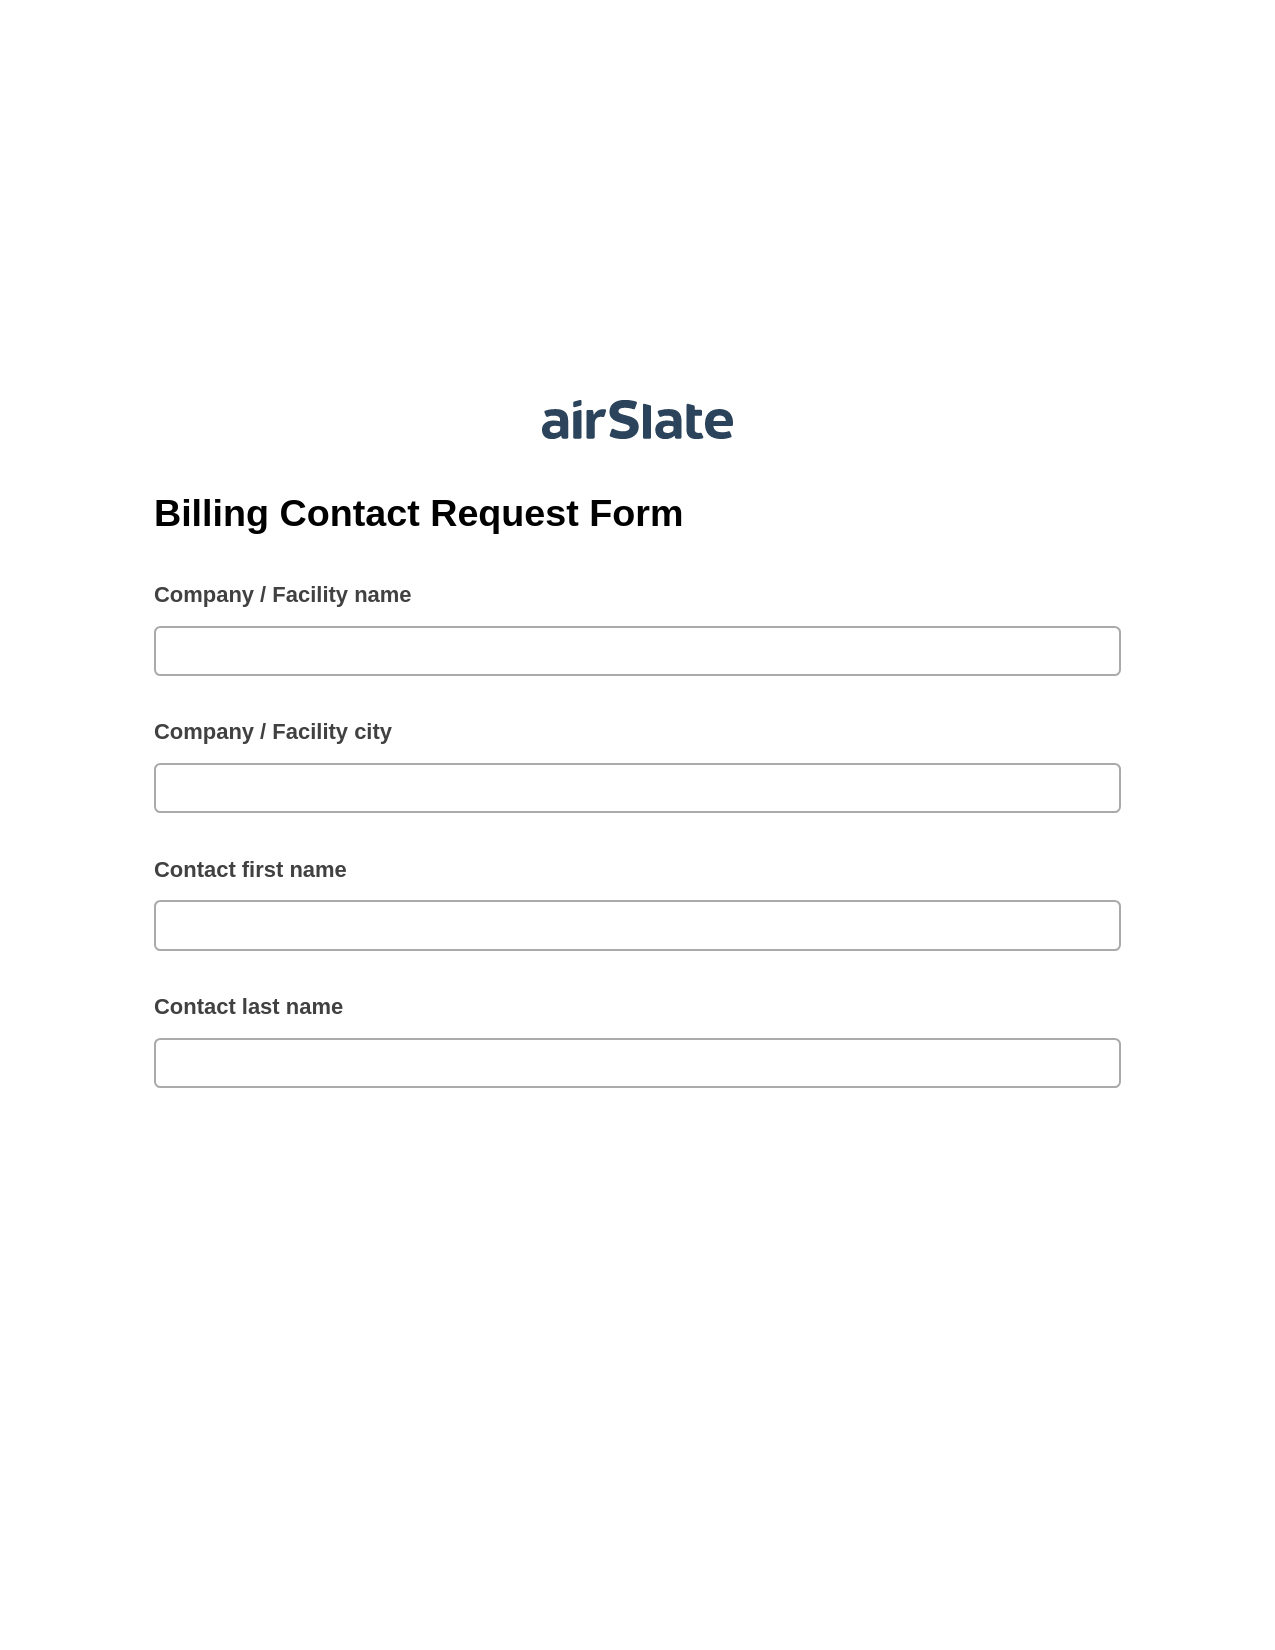 Multirole Billing Contact Request Form Pre-fill Dropdowns from MySQL Bot, Create slate bot, Export to Excel 365 Bot